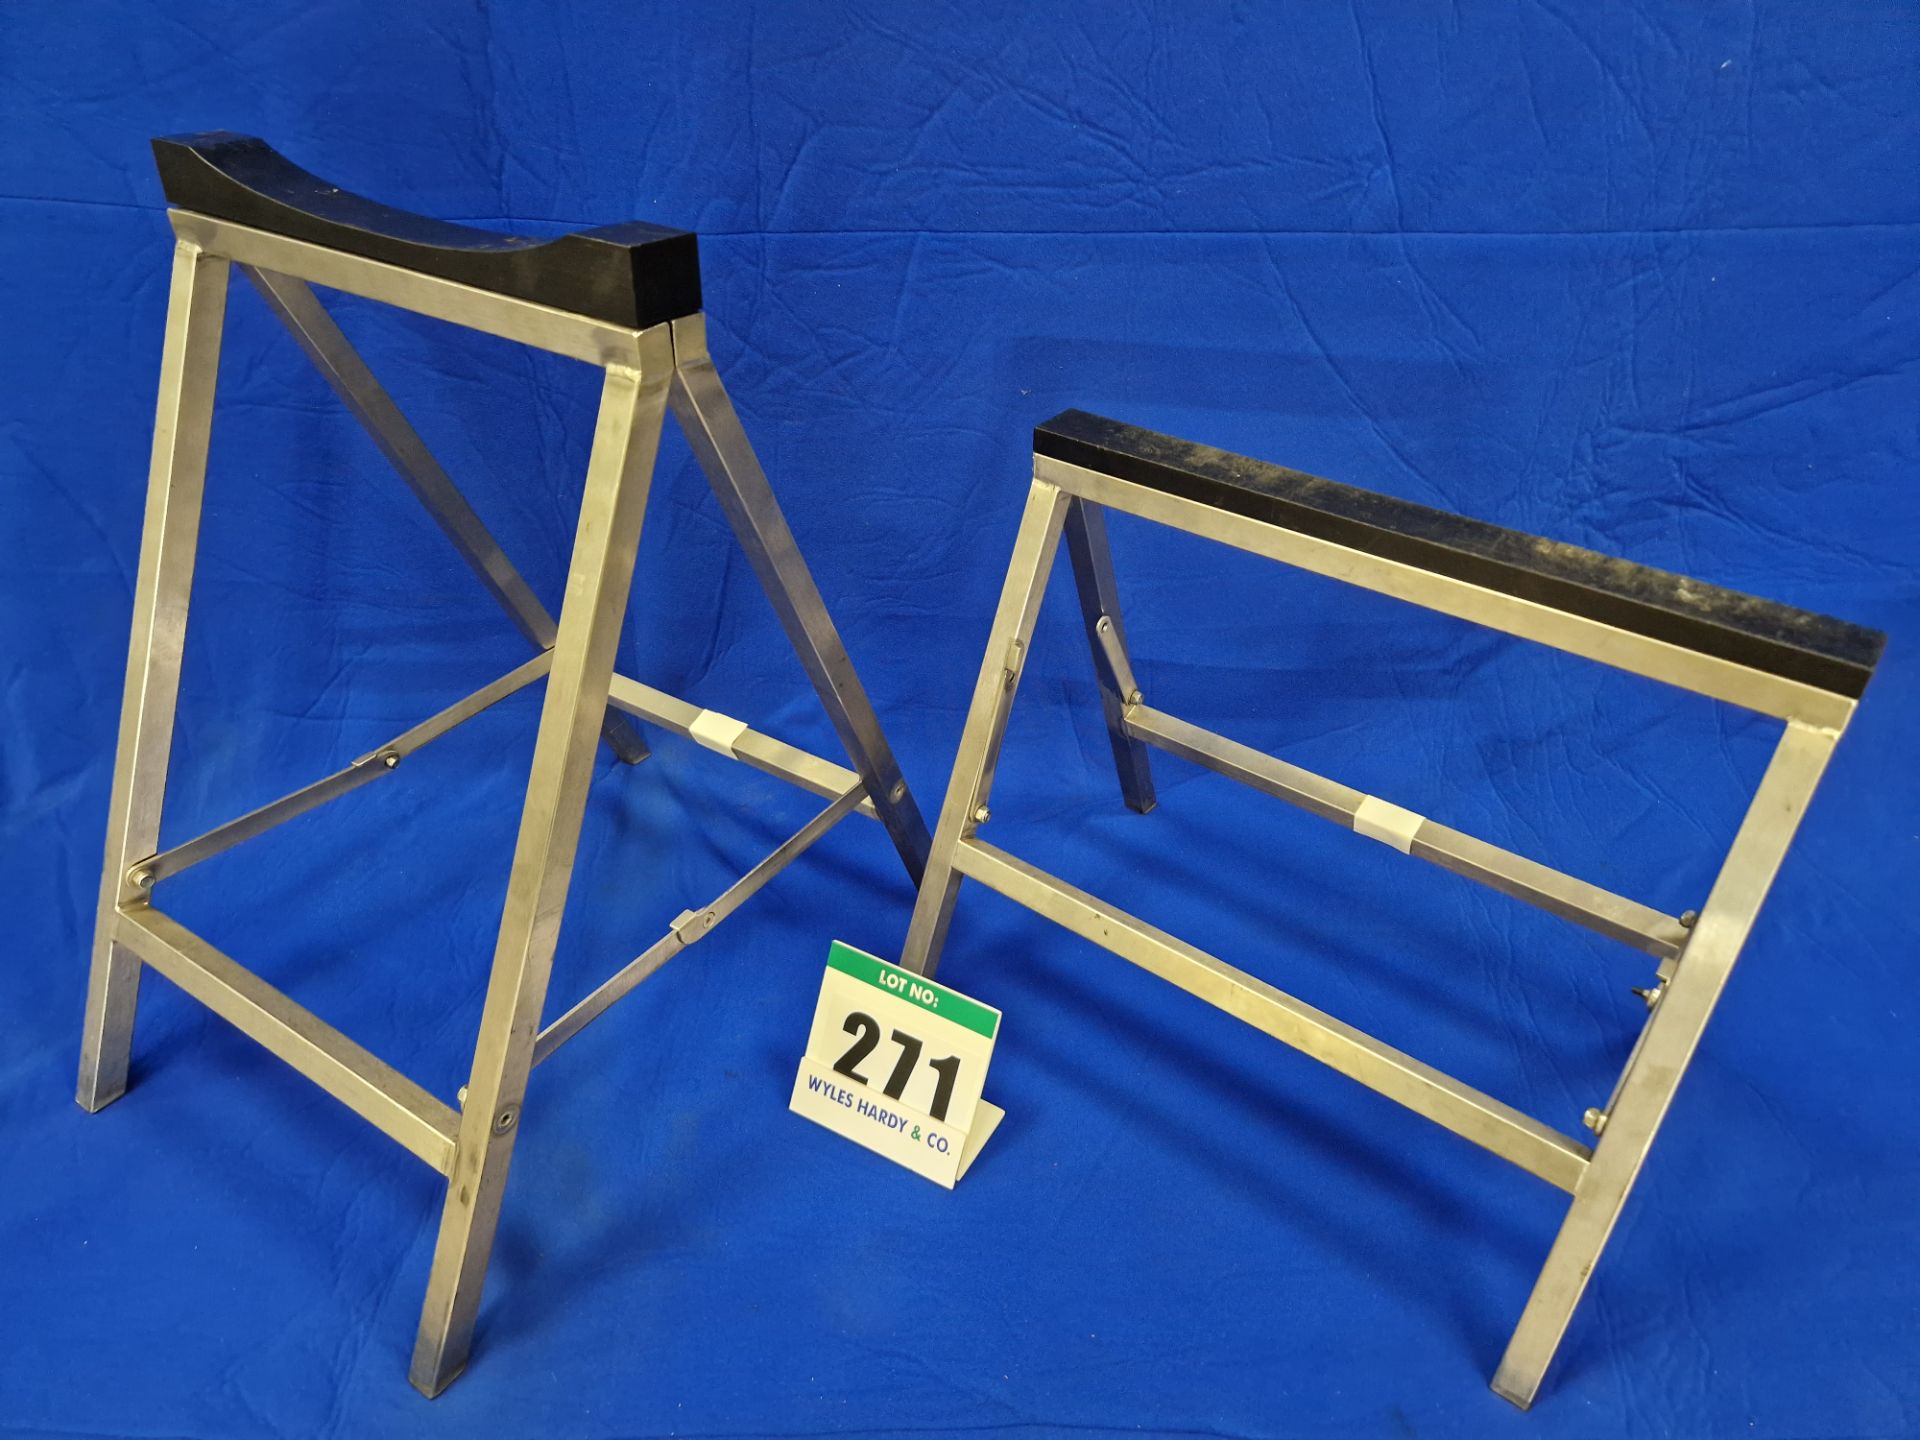 One Pair of Folding Stainless Steel Open Wheel Race Car Stands (Front and Rear)